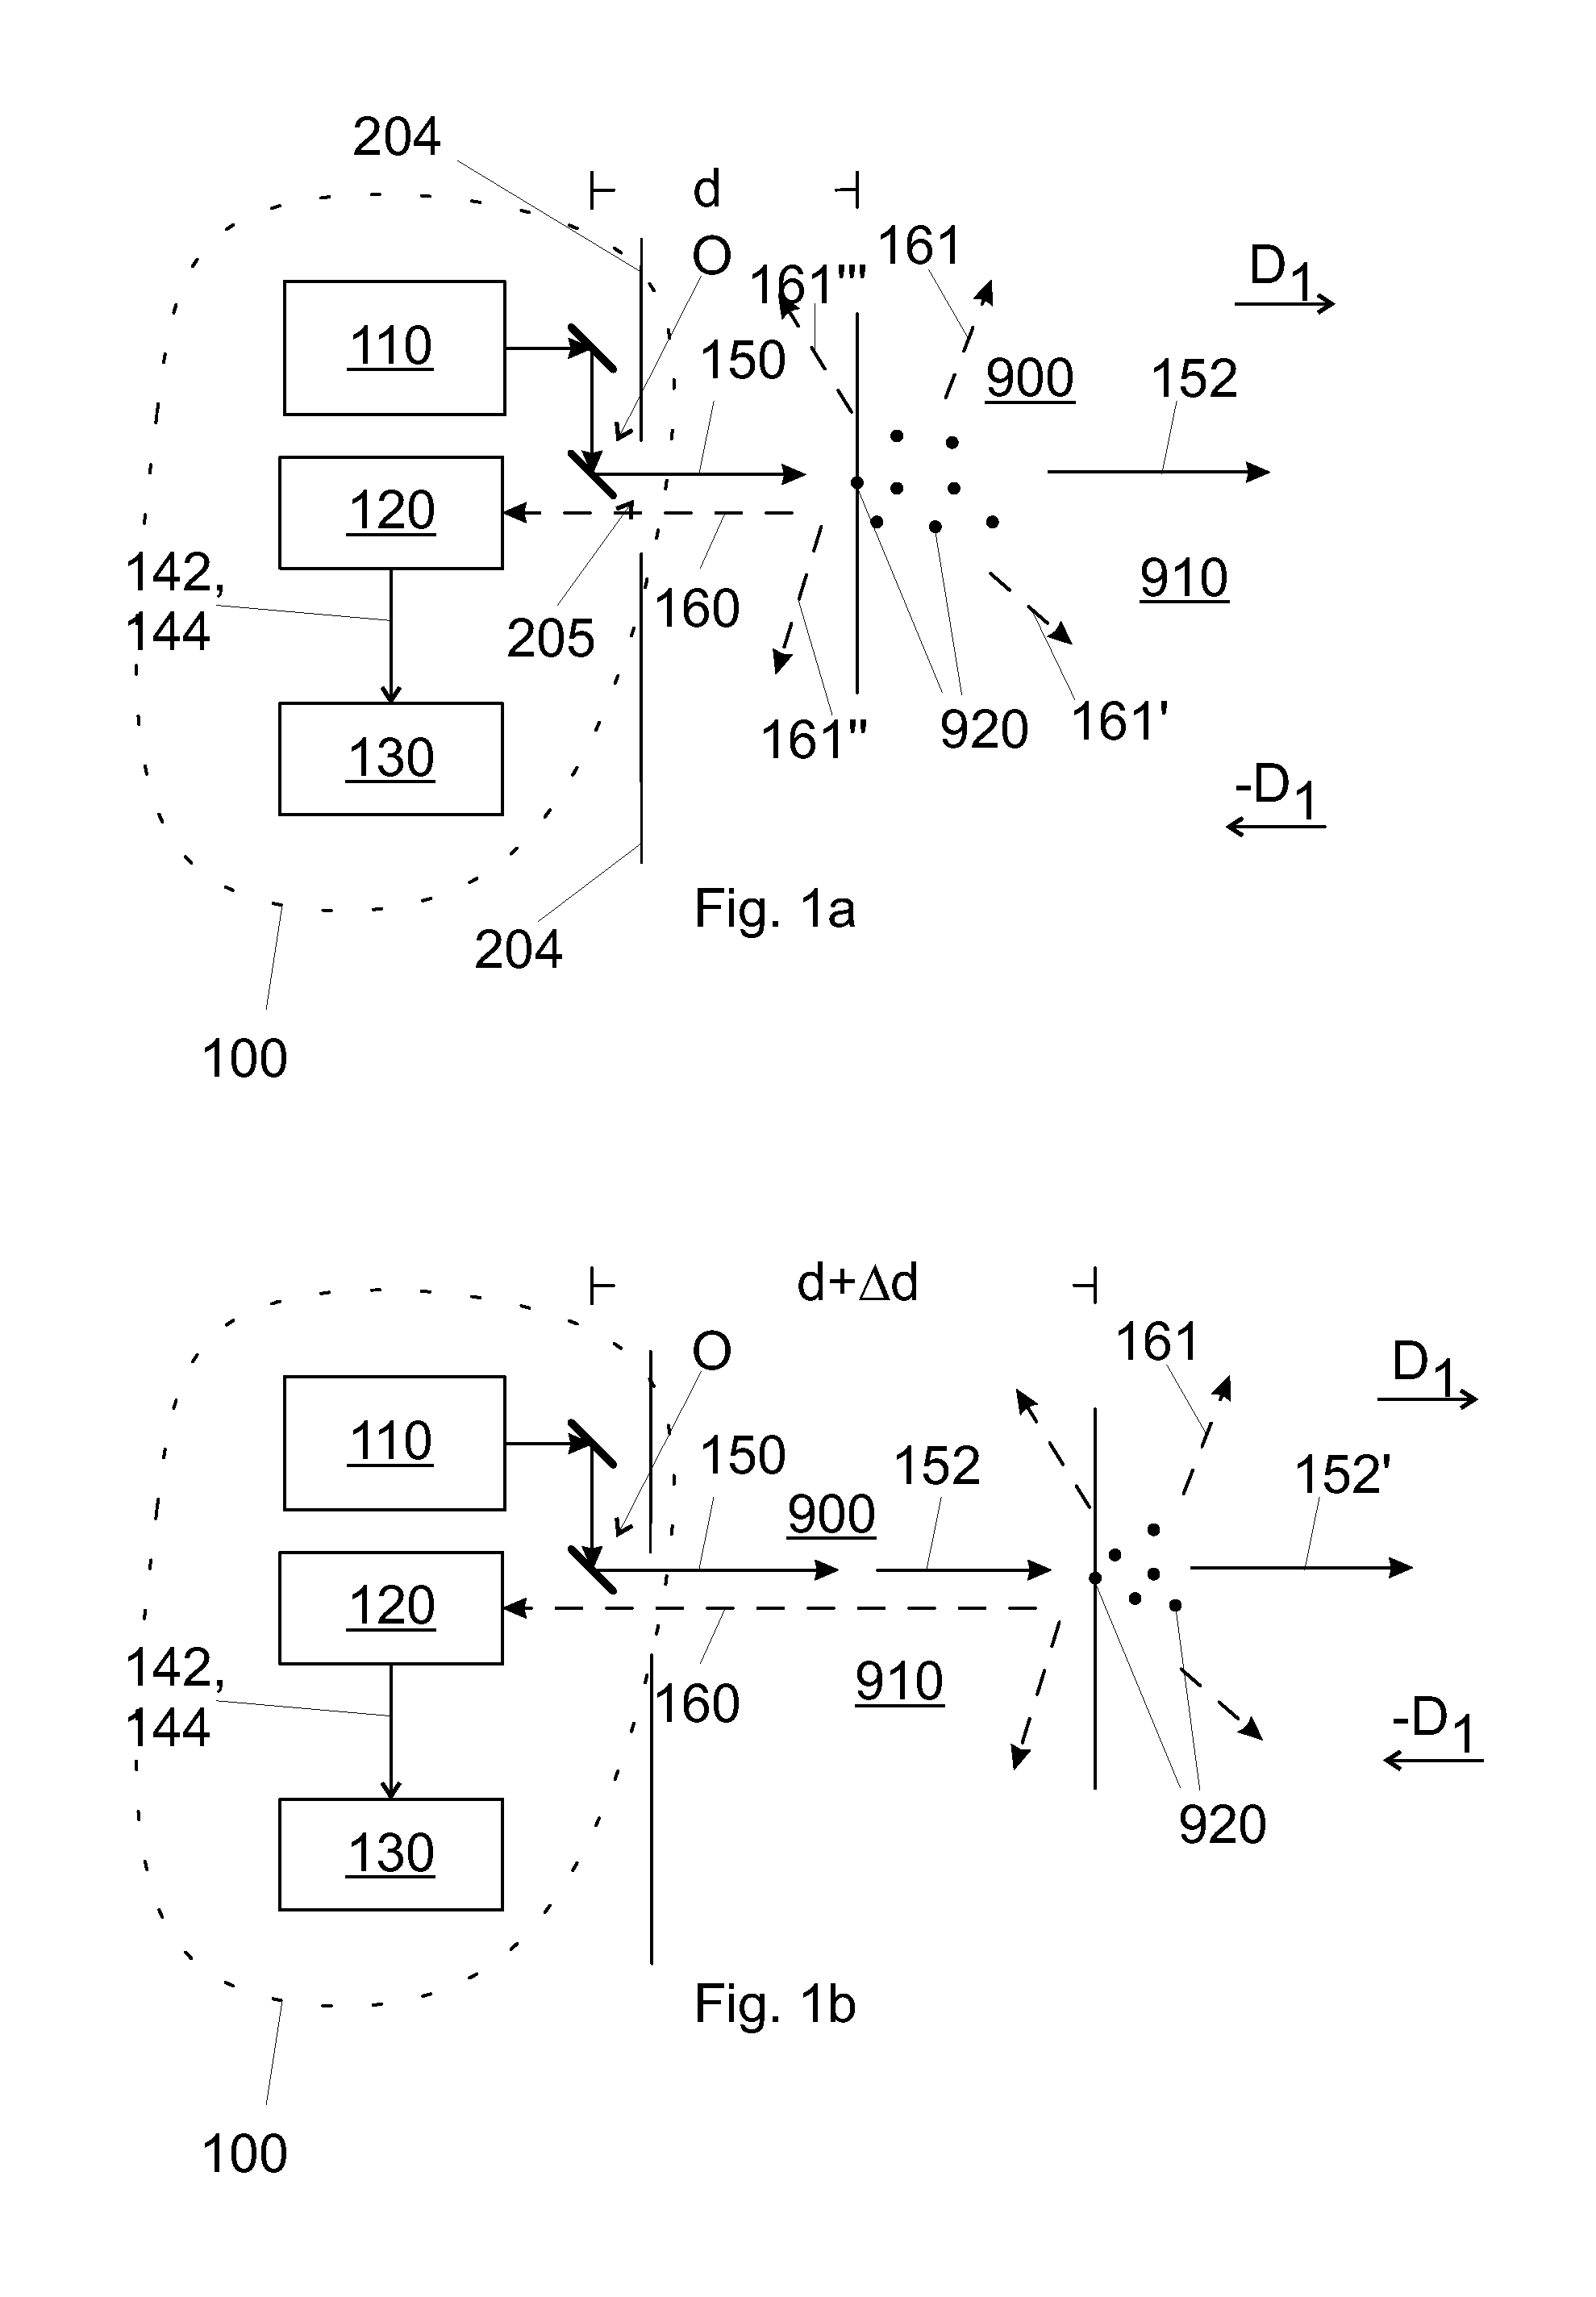 Method for measuring temperature, molecular number density, and/or pressure of a gaseous compound from a thermal device, and a thermal system